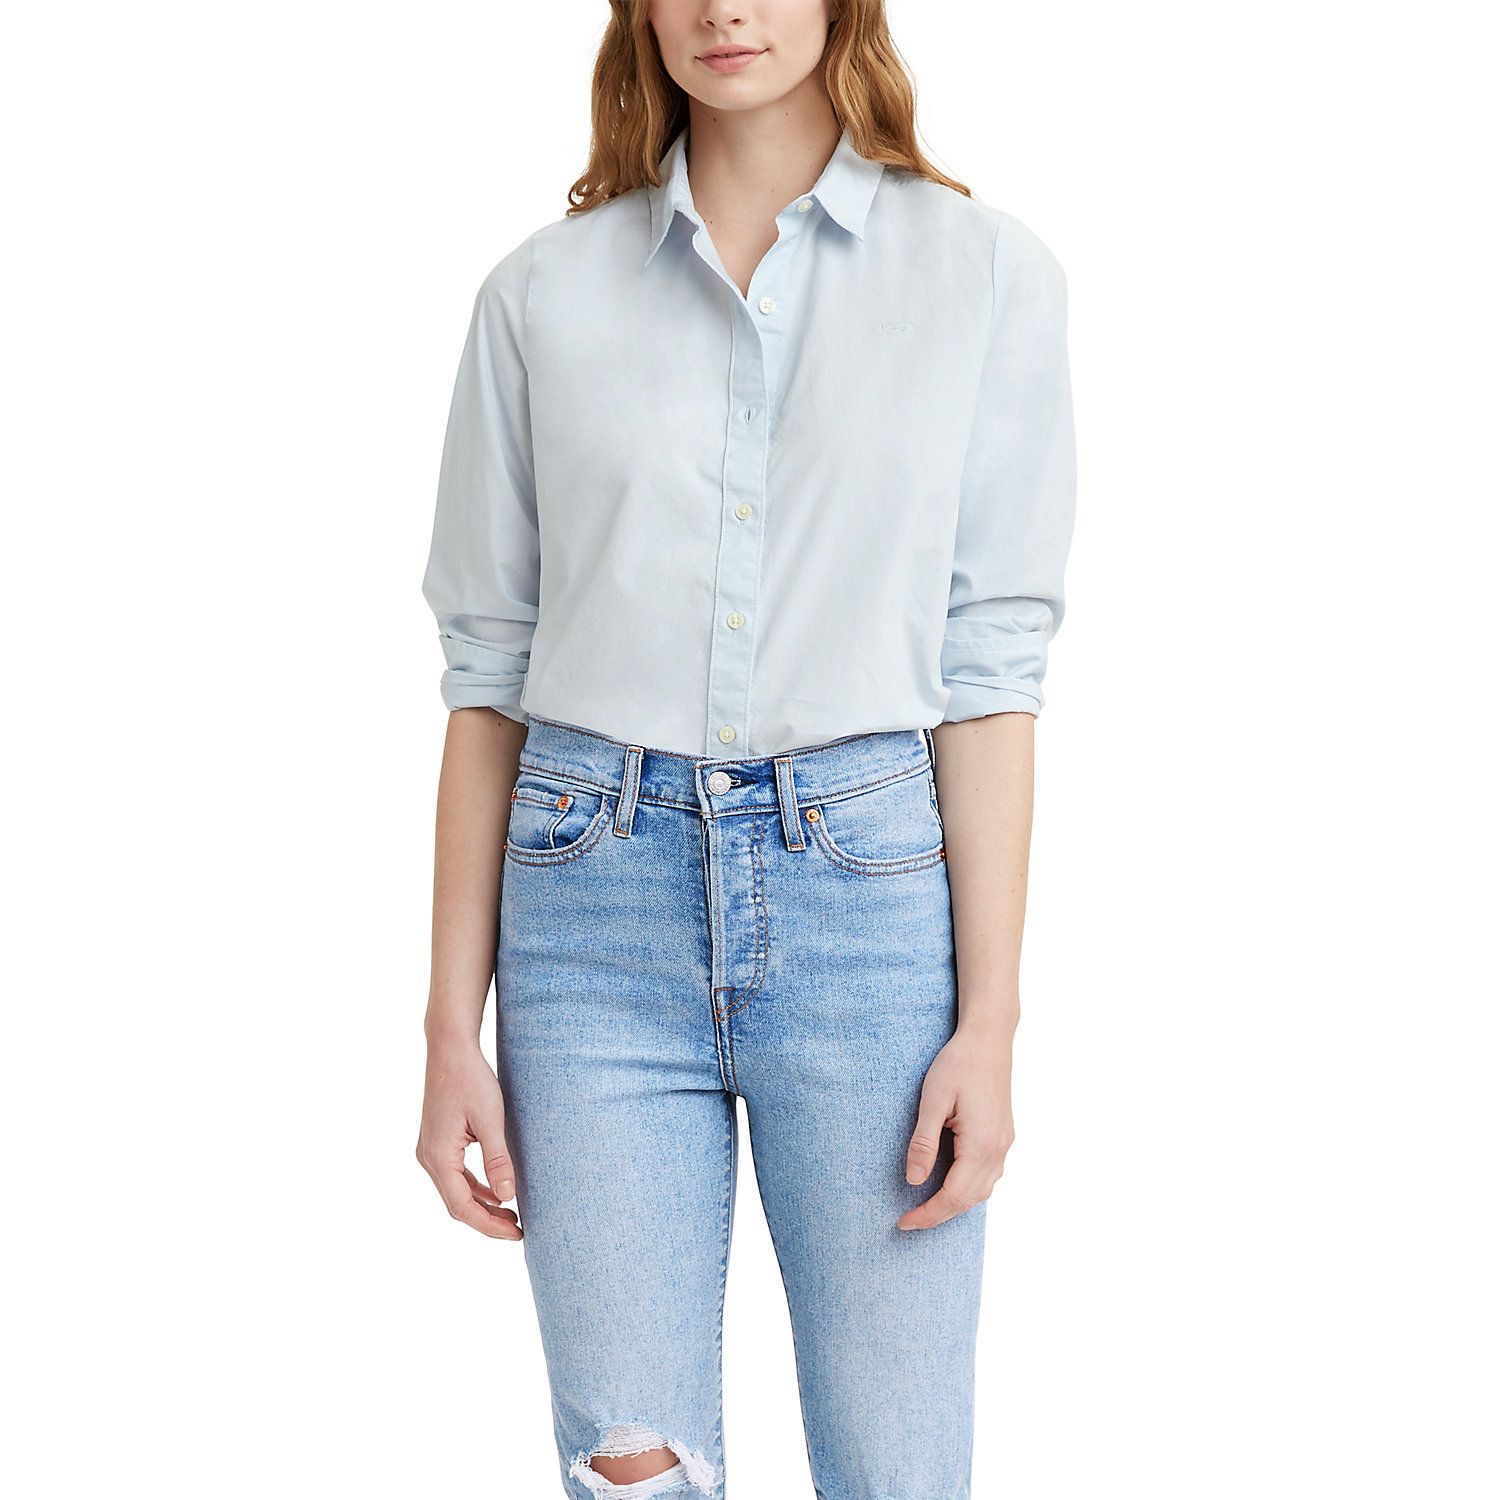 Image for Levi's Women's The Classic Shirt at Kohl's.